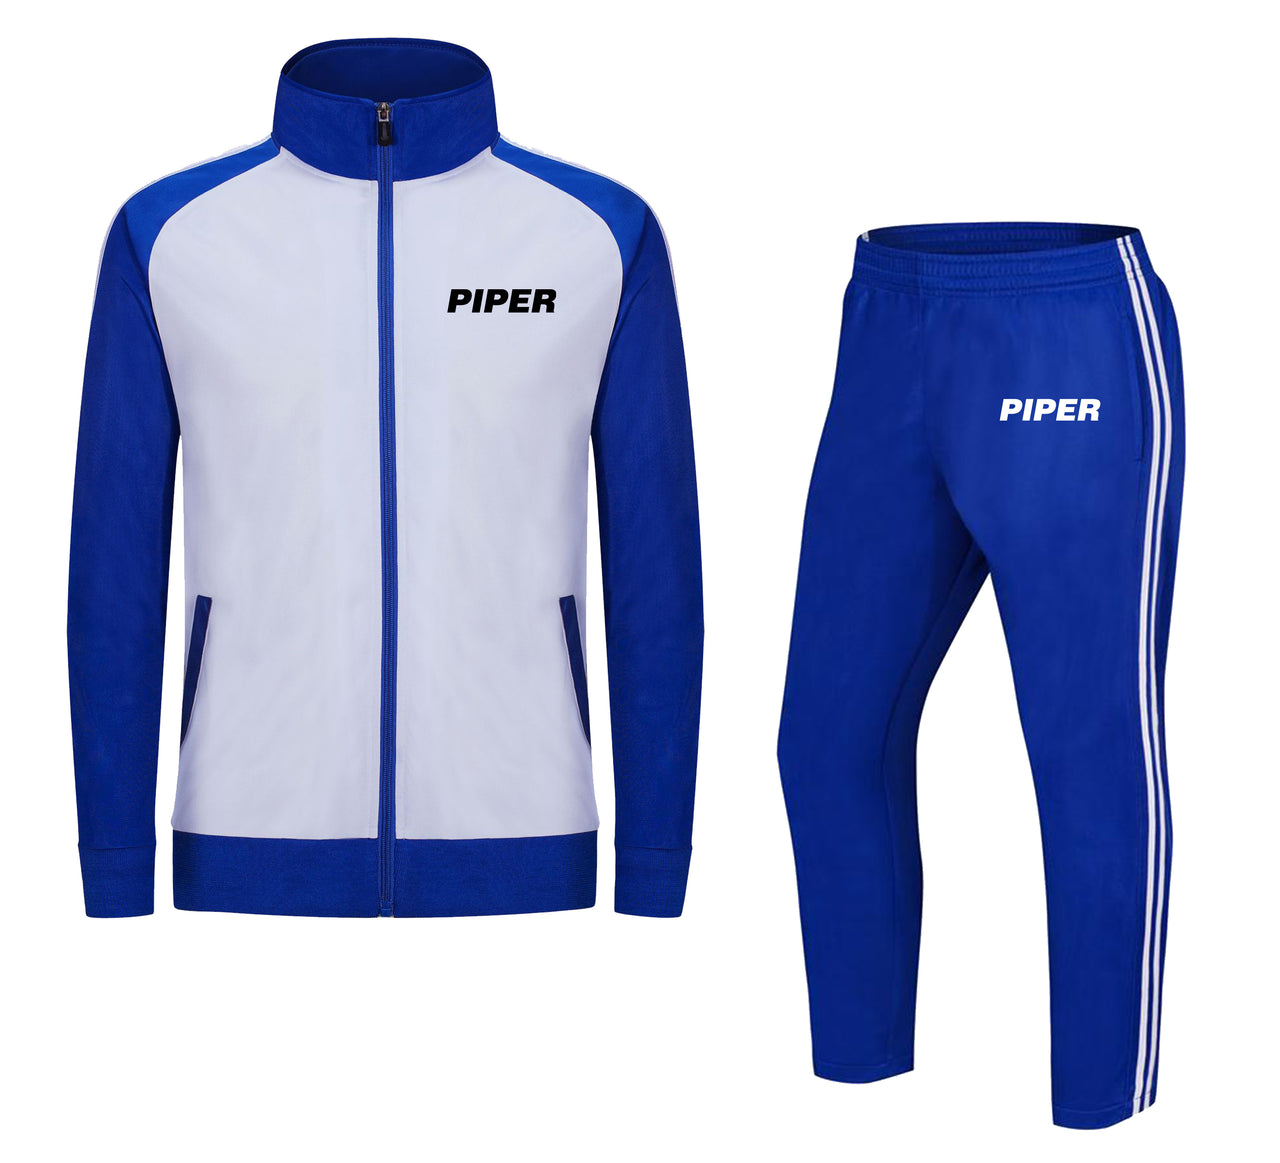 Piper & Text Designed "CHILDREN" Tracksuits